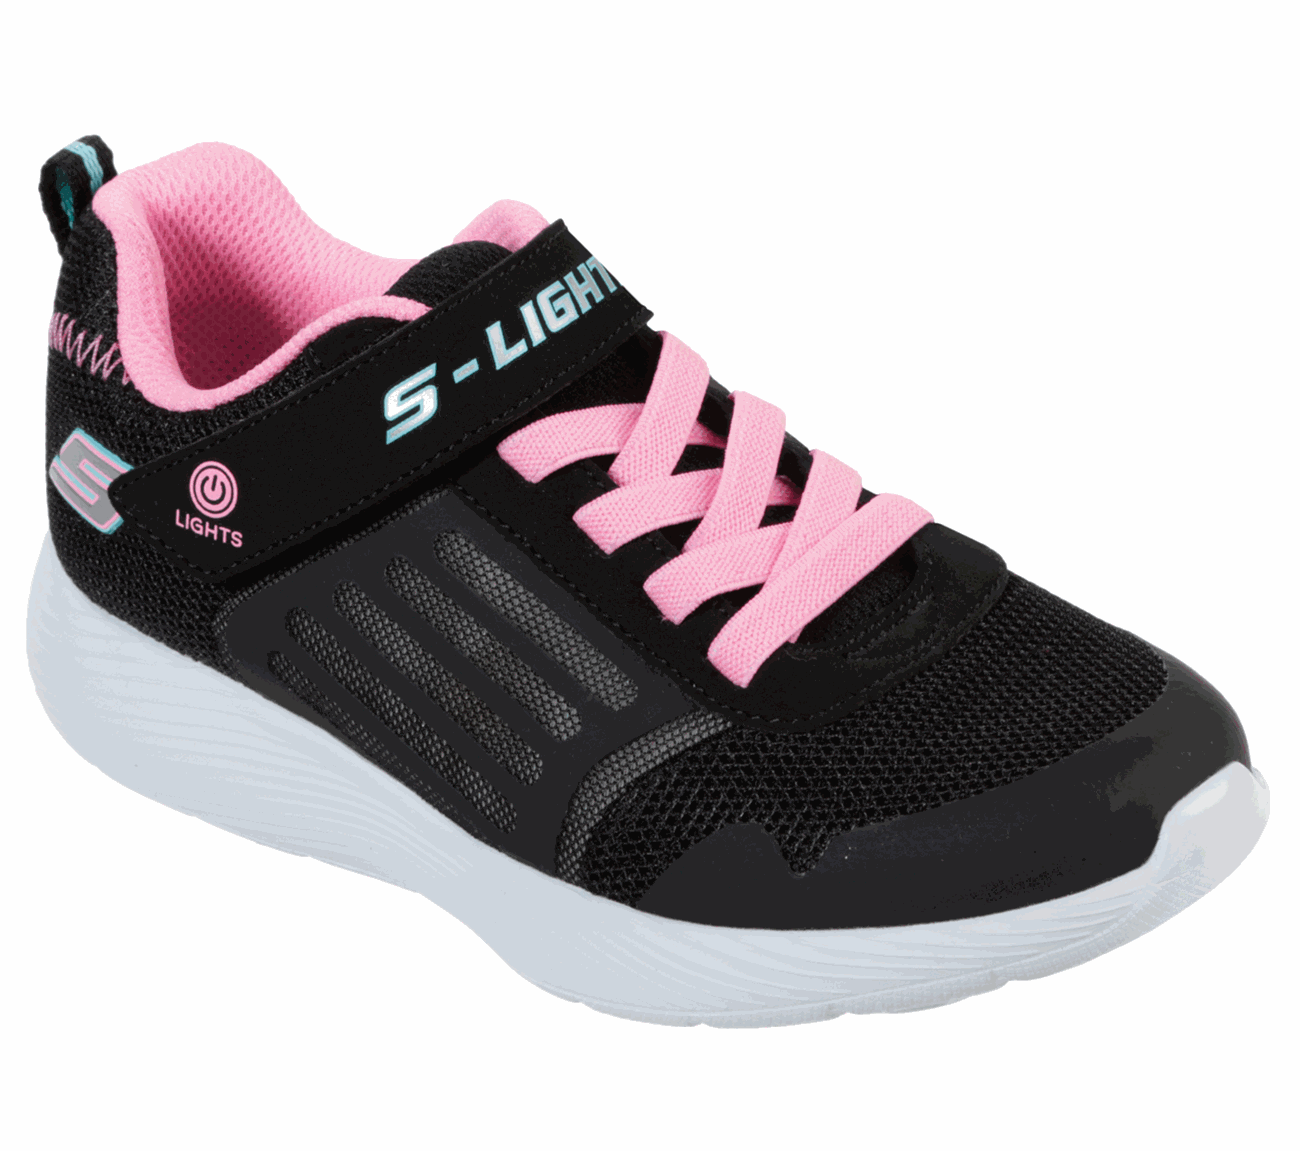 s lights powered by skechers